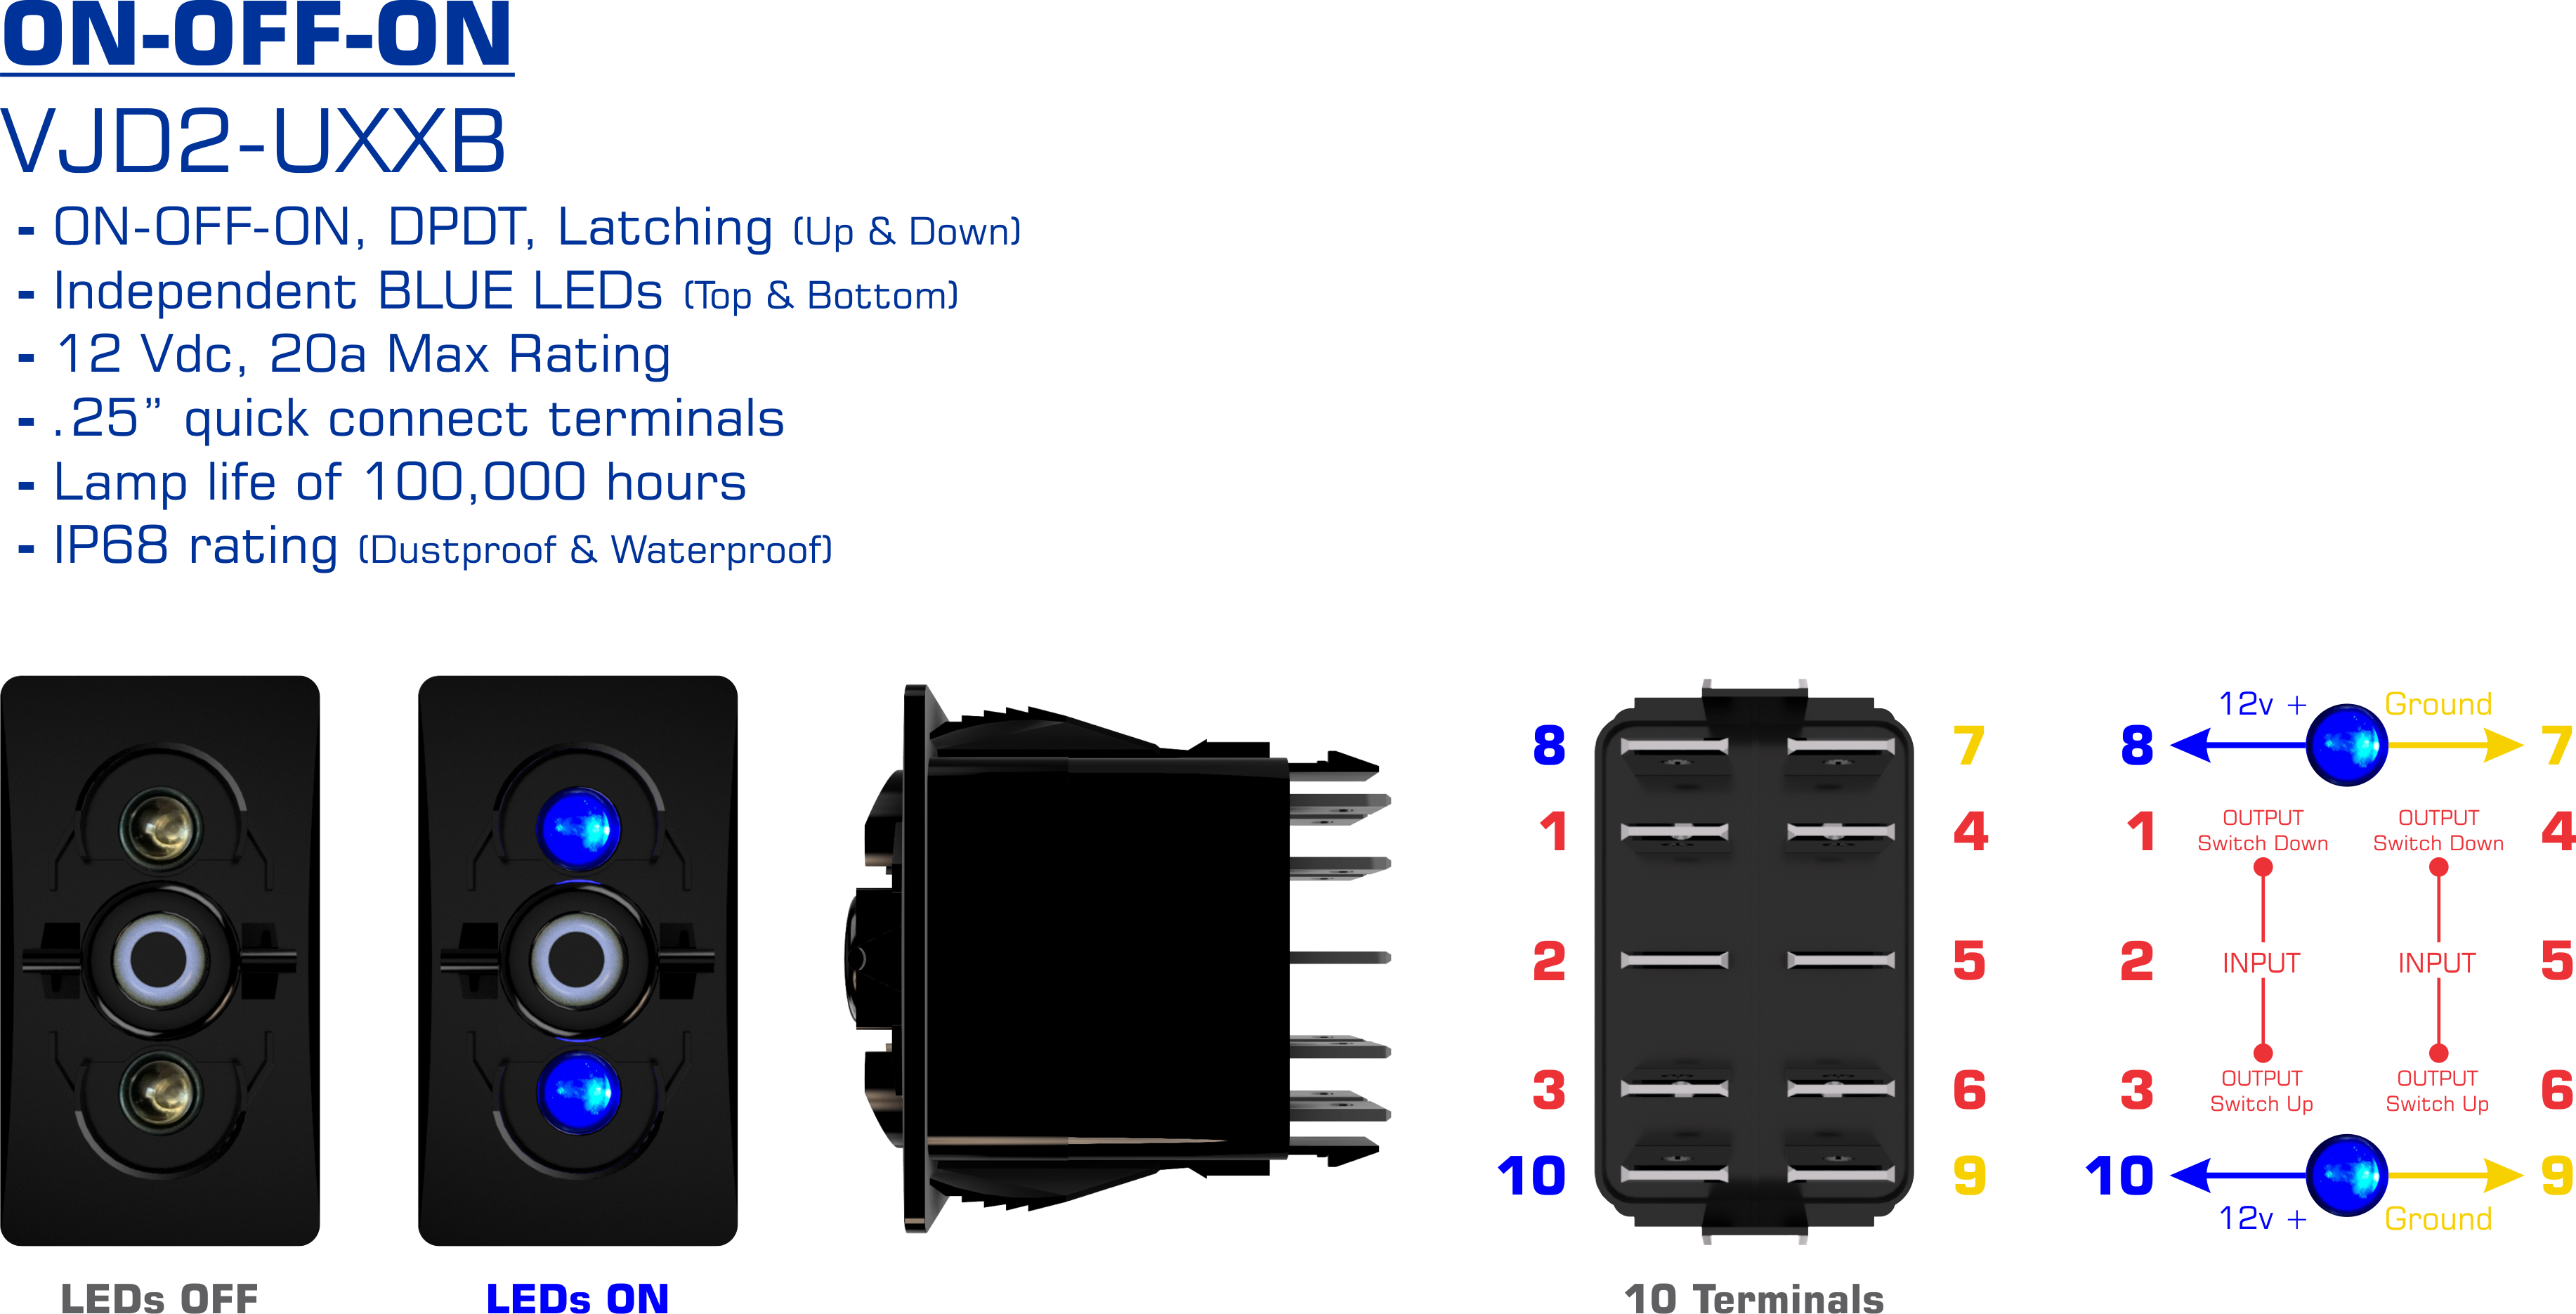 ON-OFF-ON Blue LED Switch Body Info